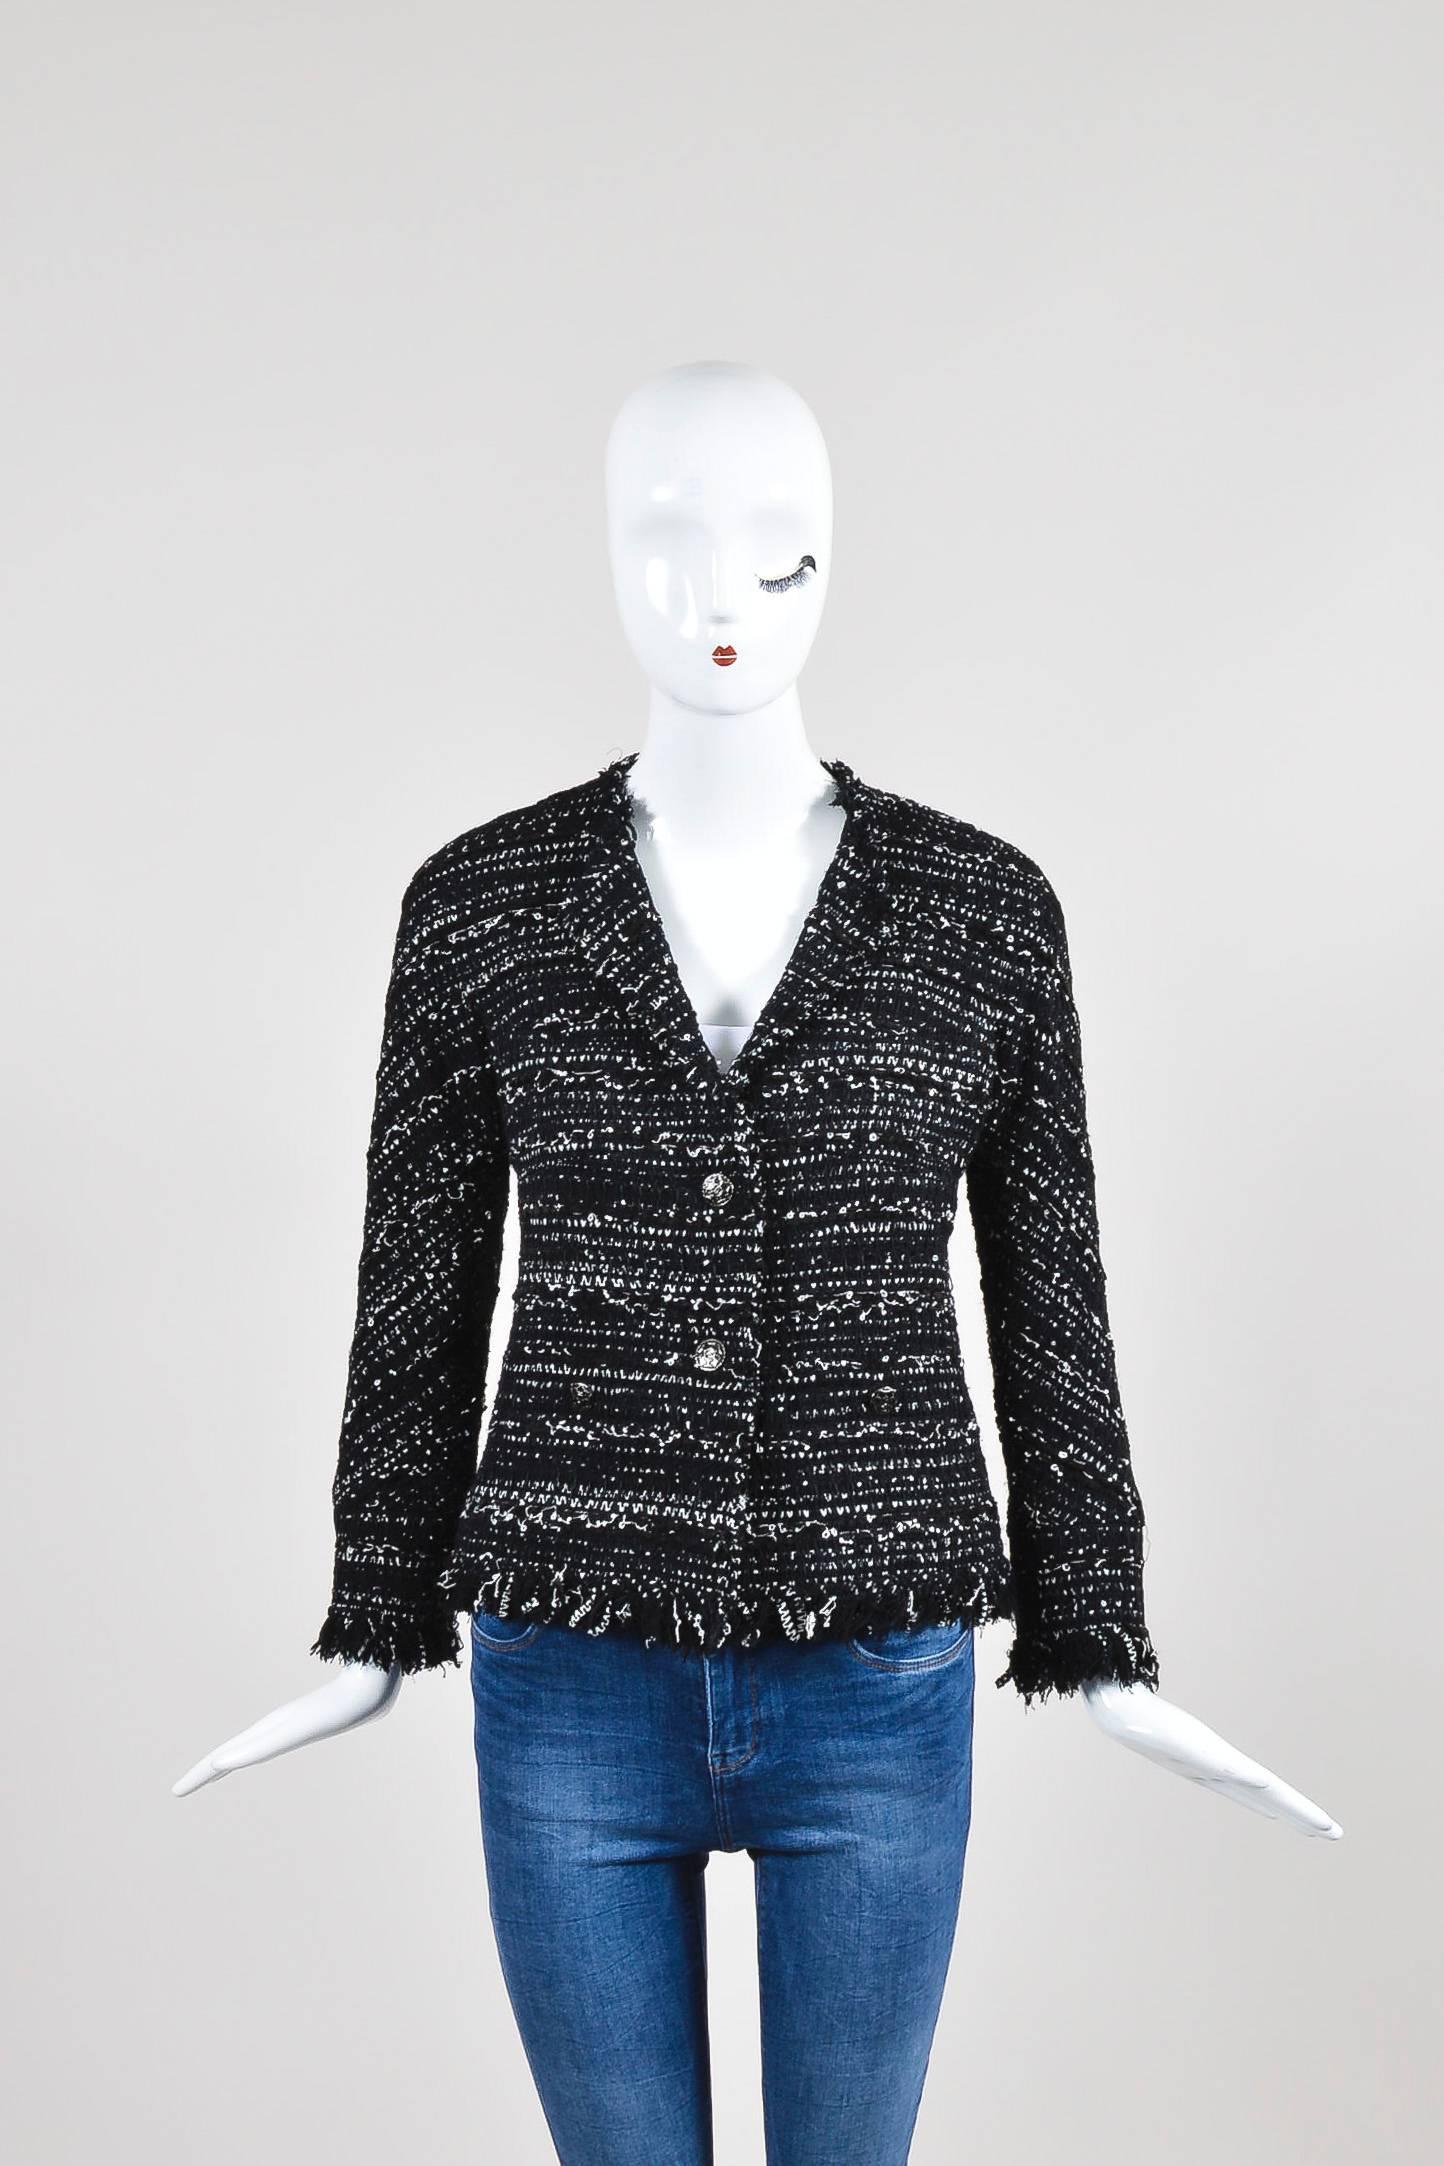 French house Chanel is known for their beautiful classic tweed jackets and this gorgeous piece is no exception. Black and white in color with bracelet length sleeves and two front pockets with Chanel logo embellished lacquered buttons. This item